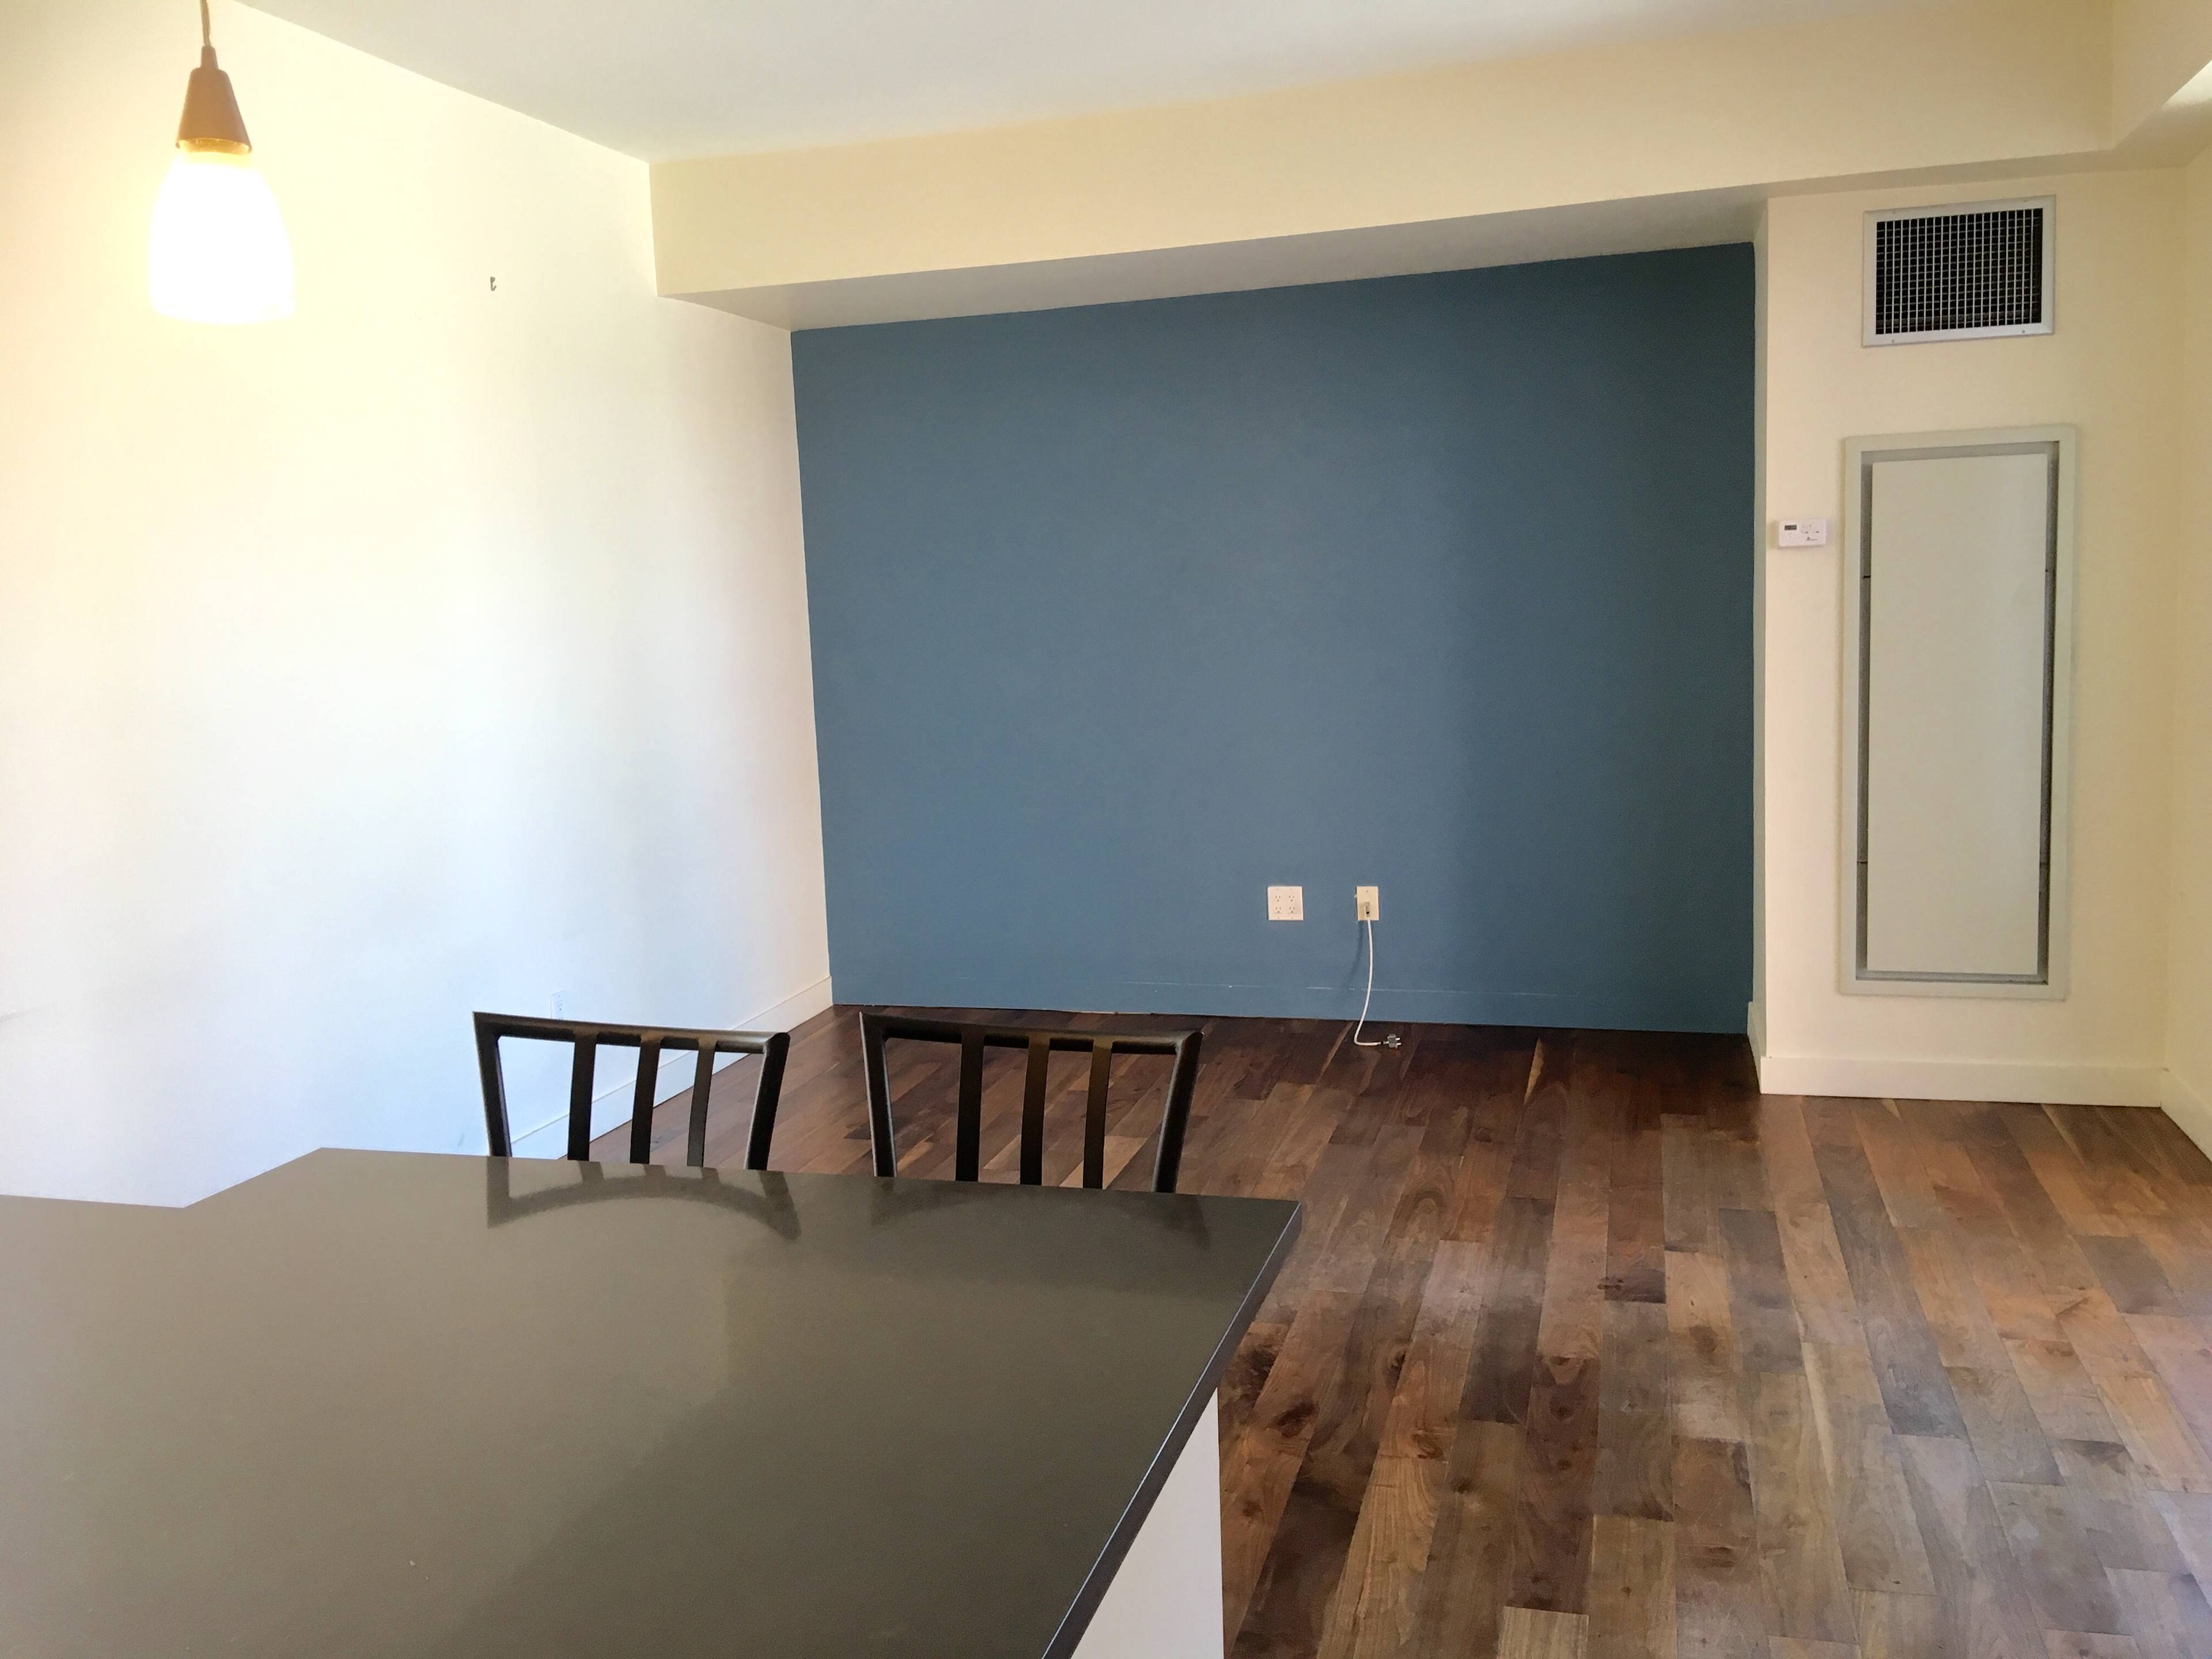 Rare opportunity to live in this spacious 1Bed/1bath with your own private balcony